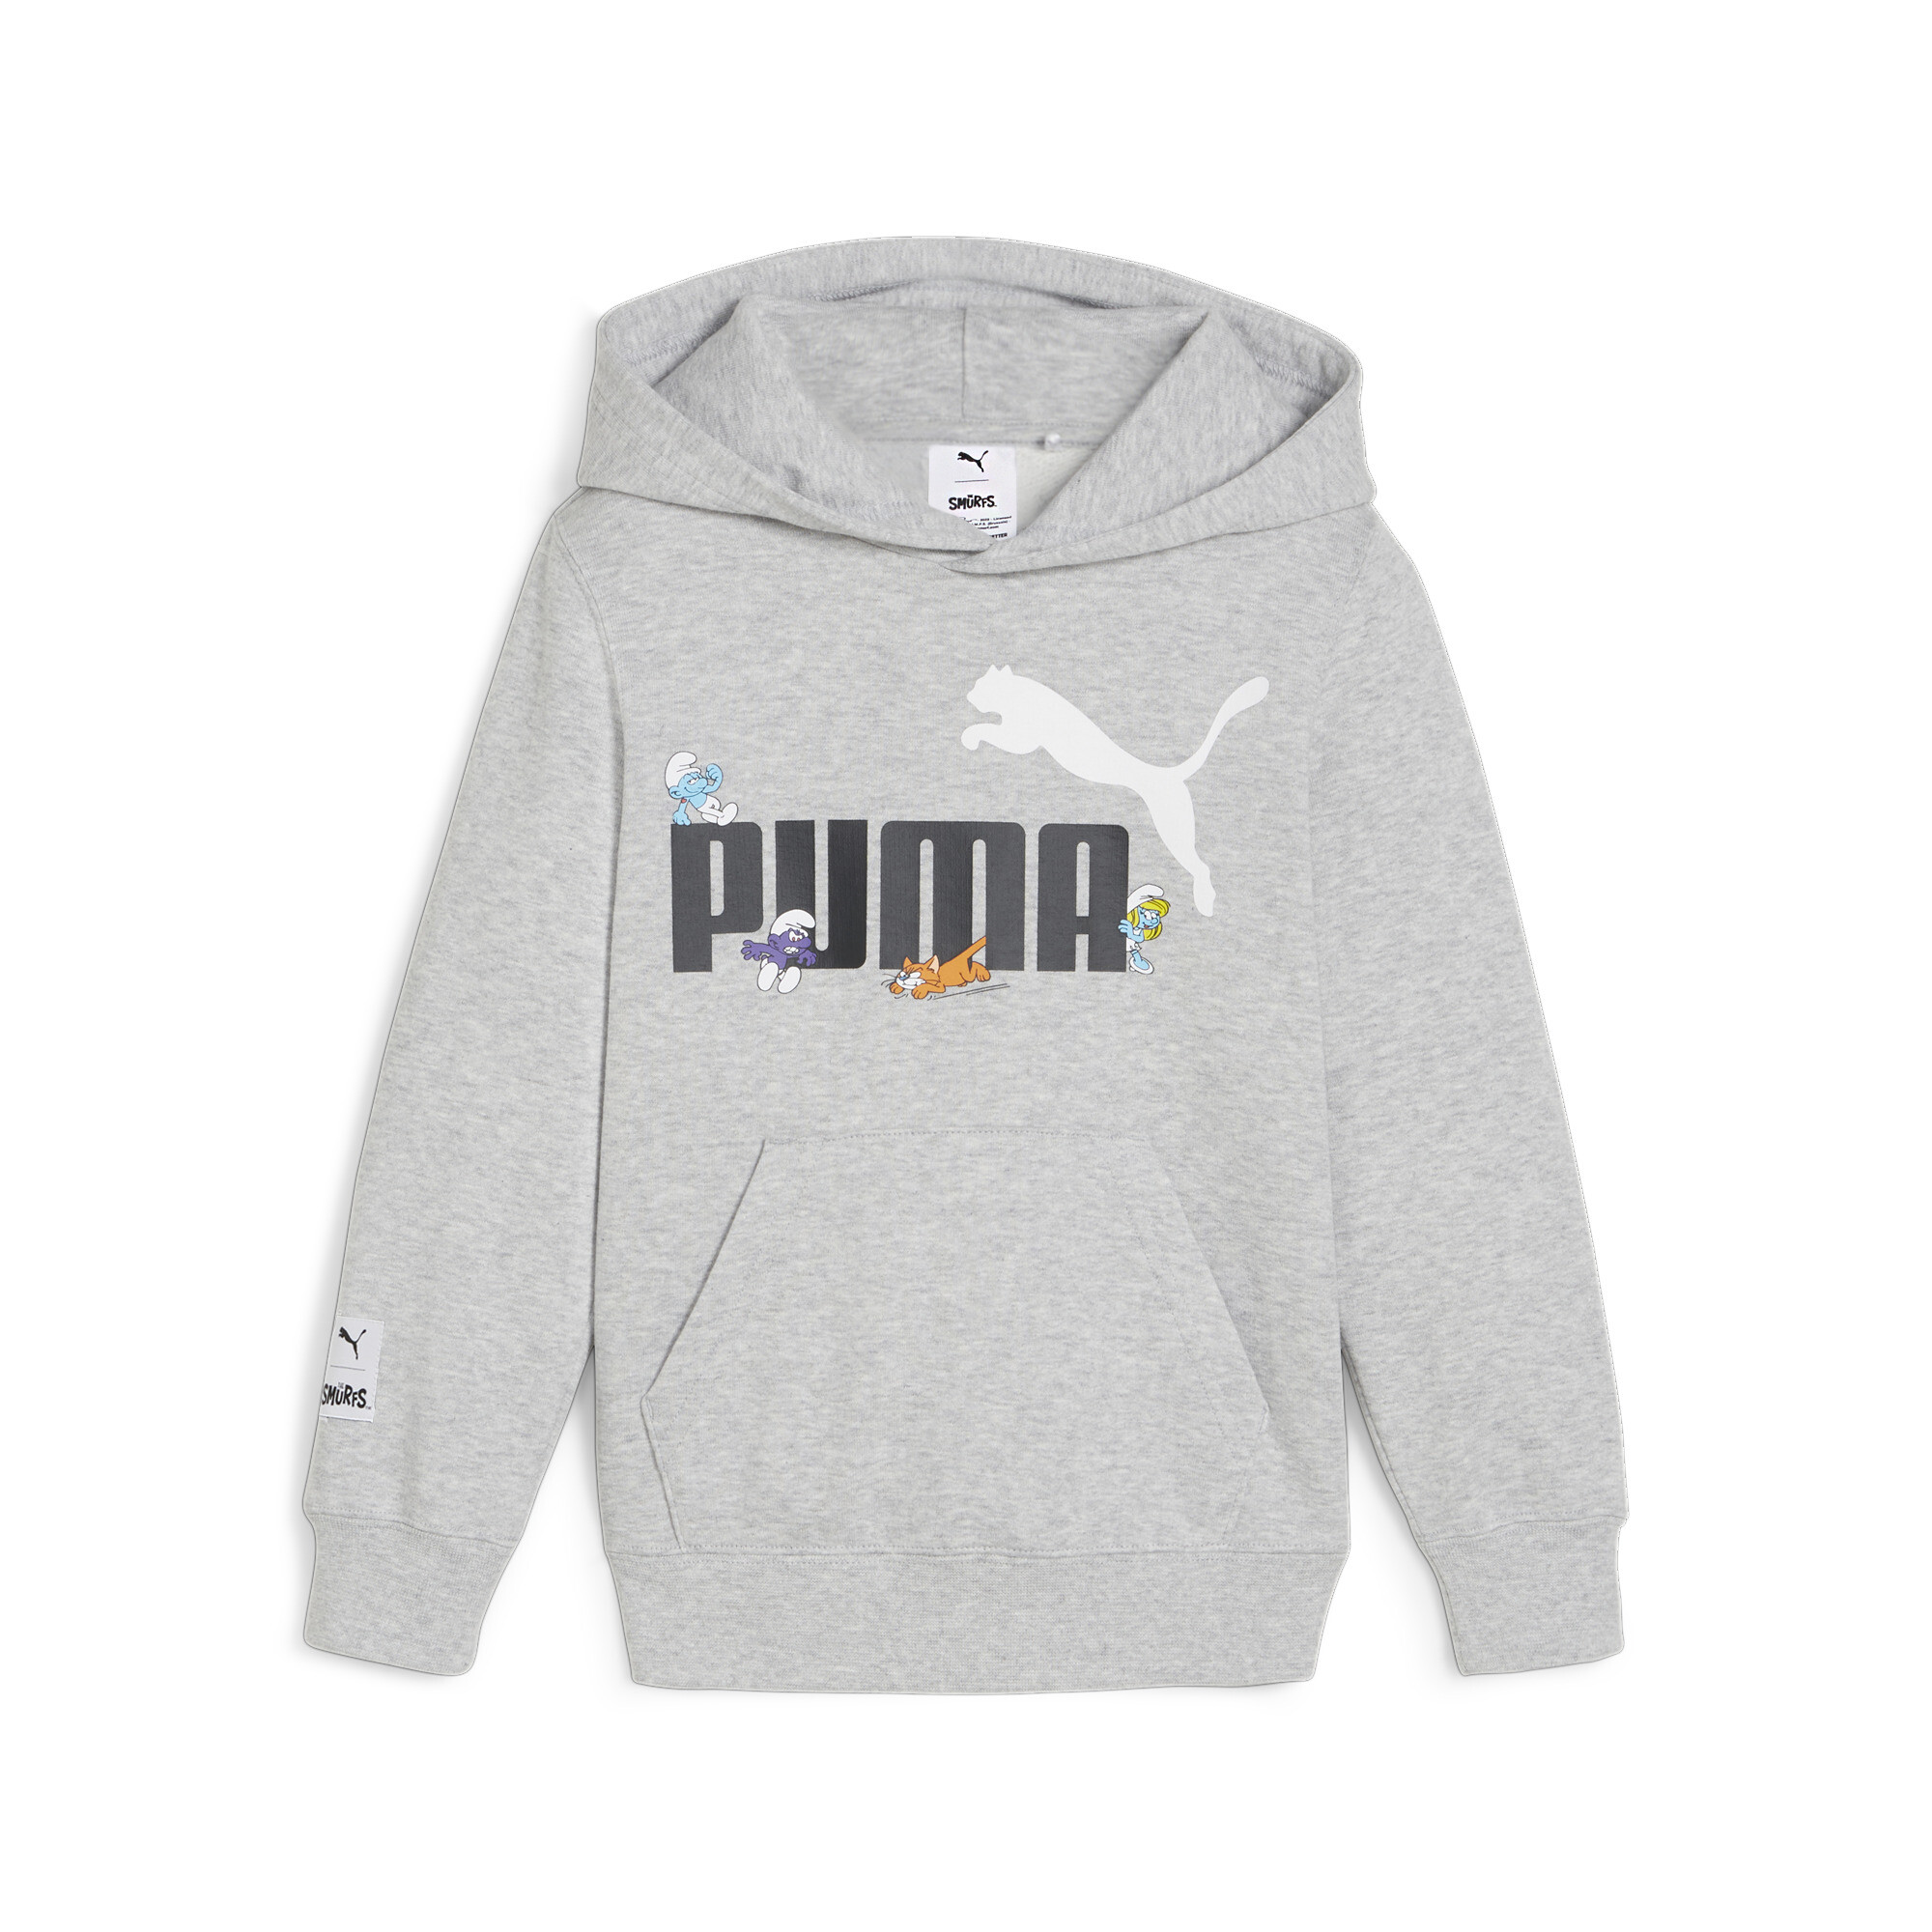 PUMA X THE SMURFS Hoodie In Heather, Size 7-8 Youth